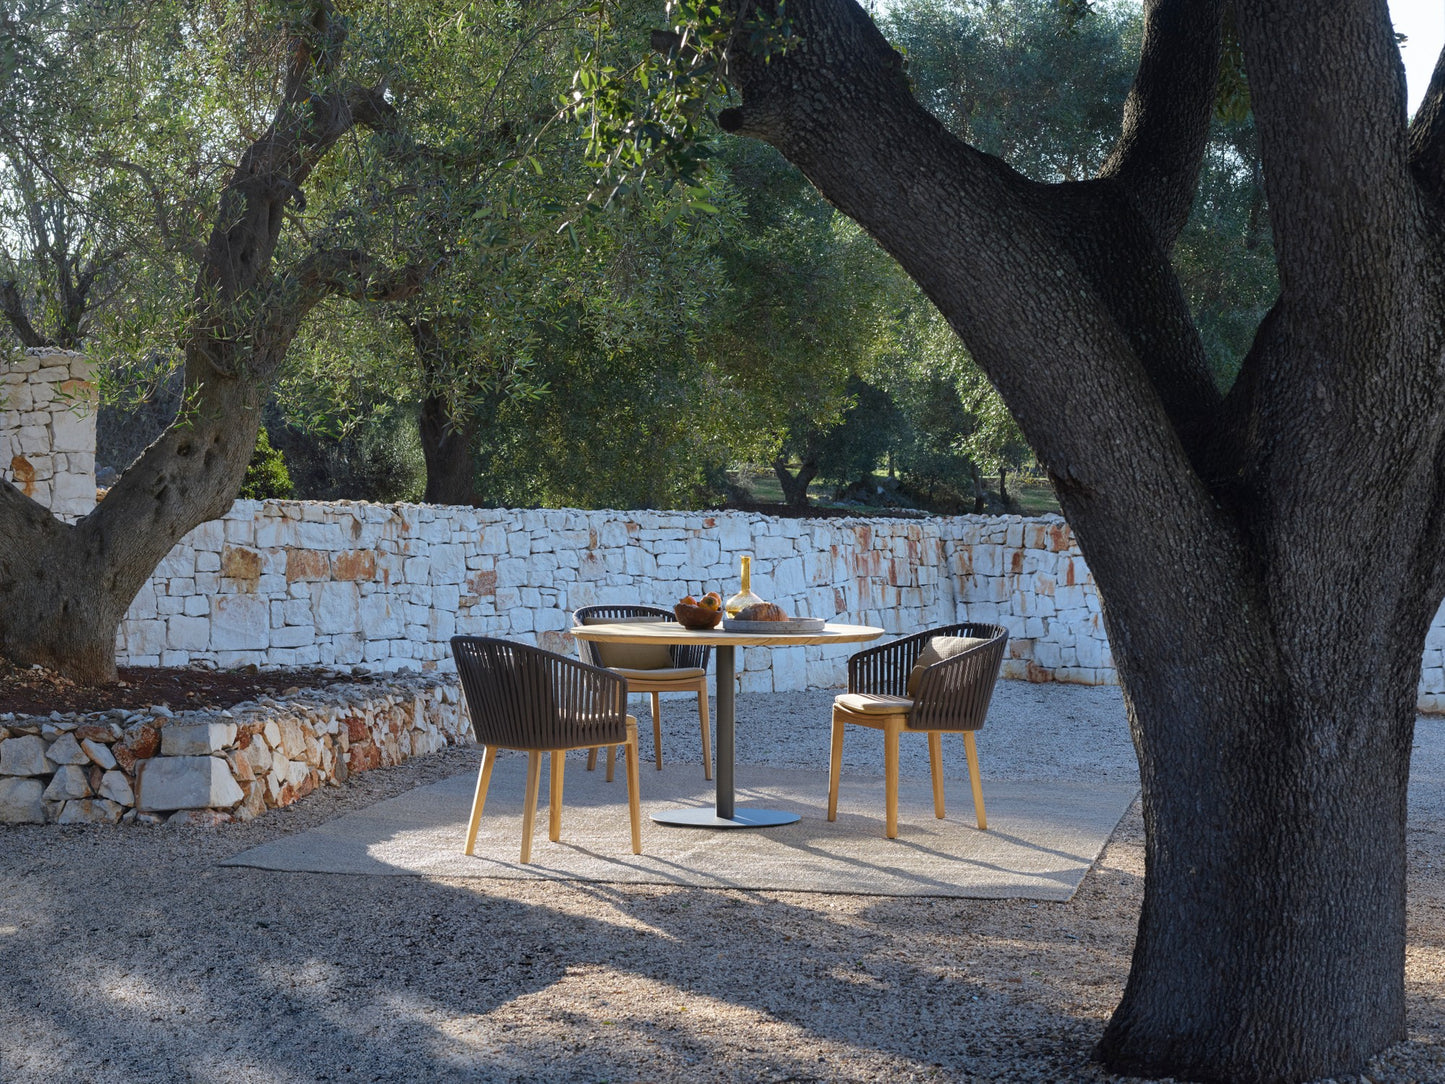 Tribu Mood Outdoor Dining Chair